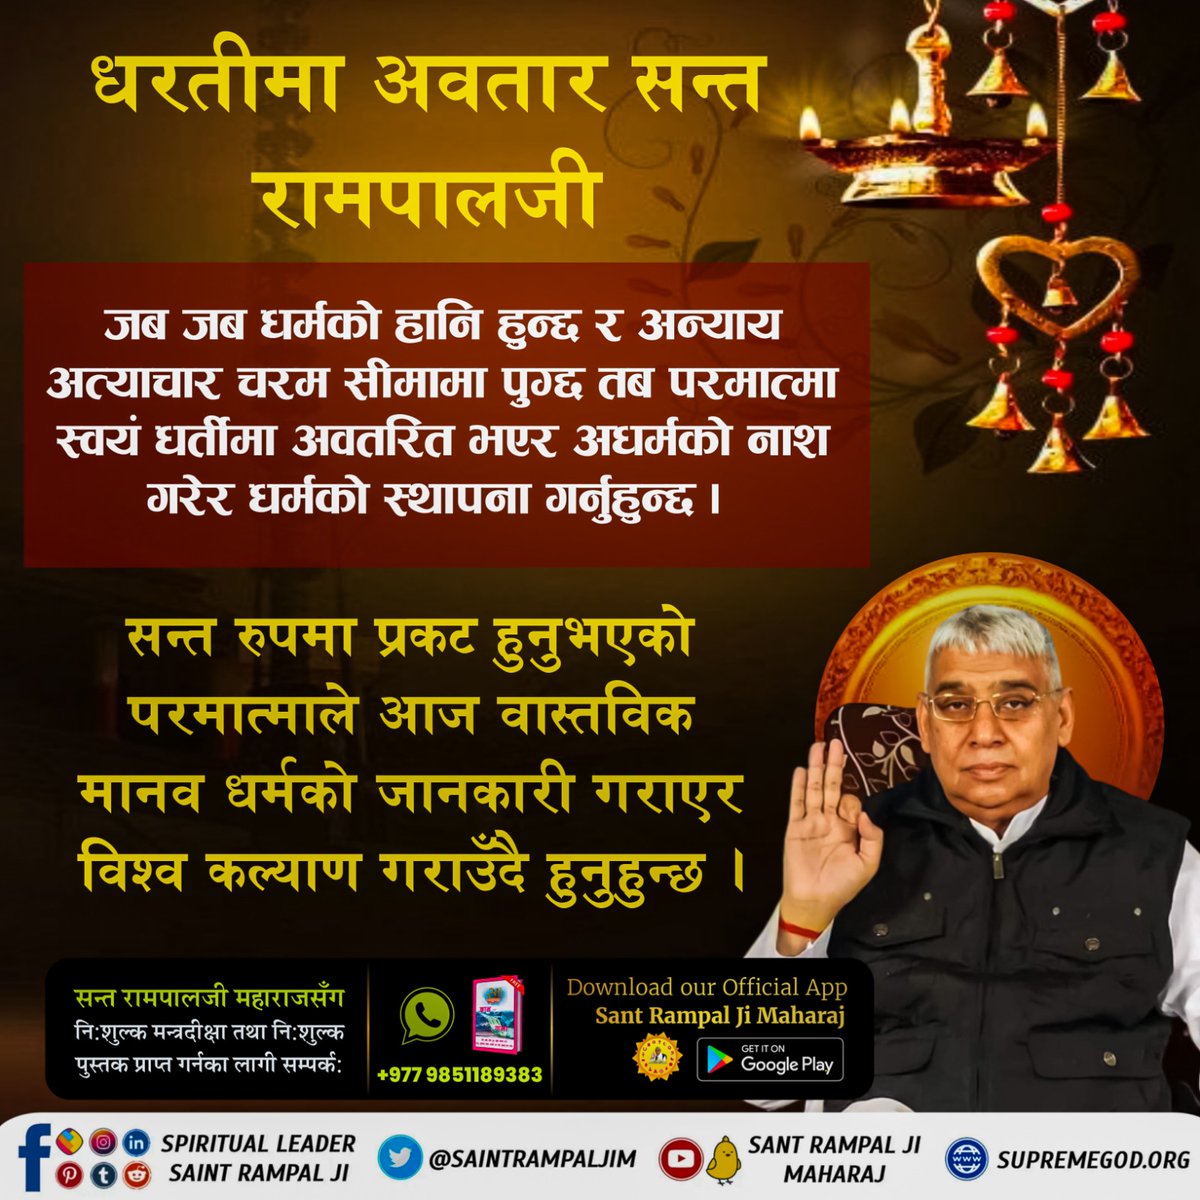 #धरतीमा_अवतार_सन्त_रामपालजी 
Who teaches us to live in peace and dignity.
God On The Earth